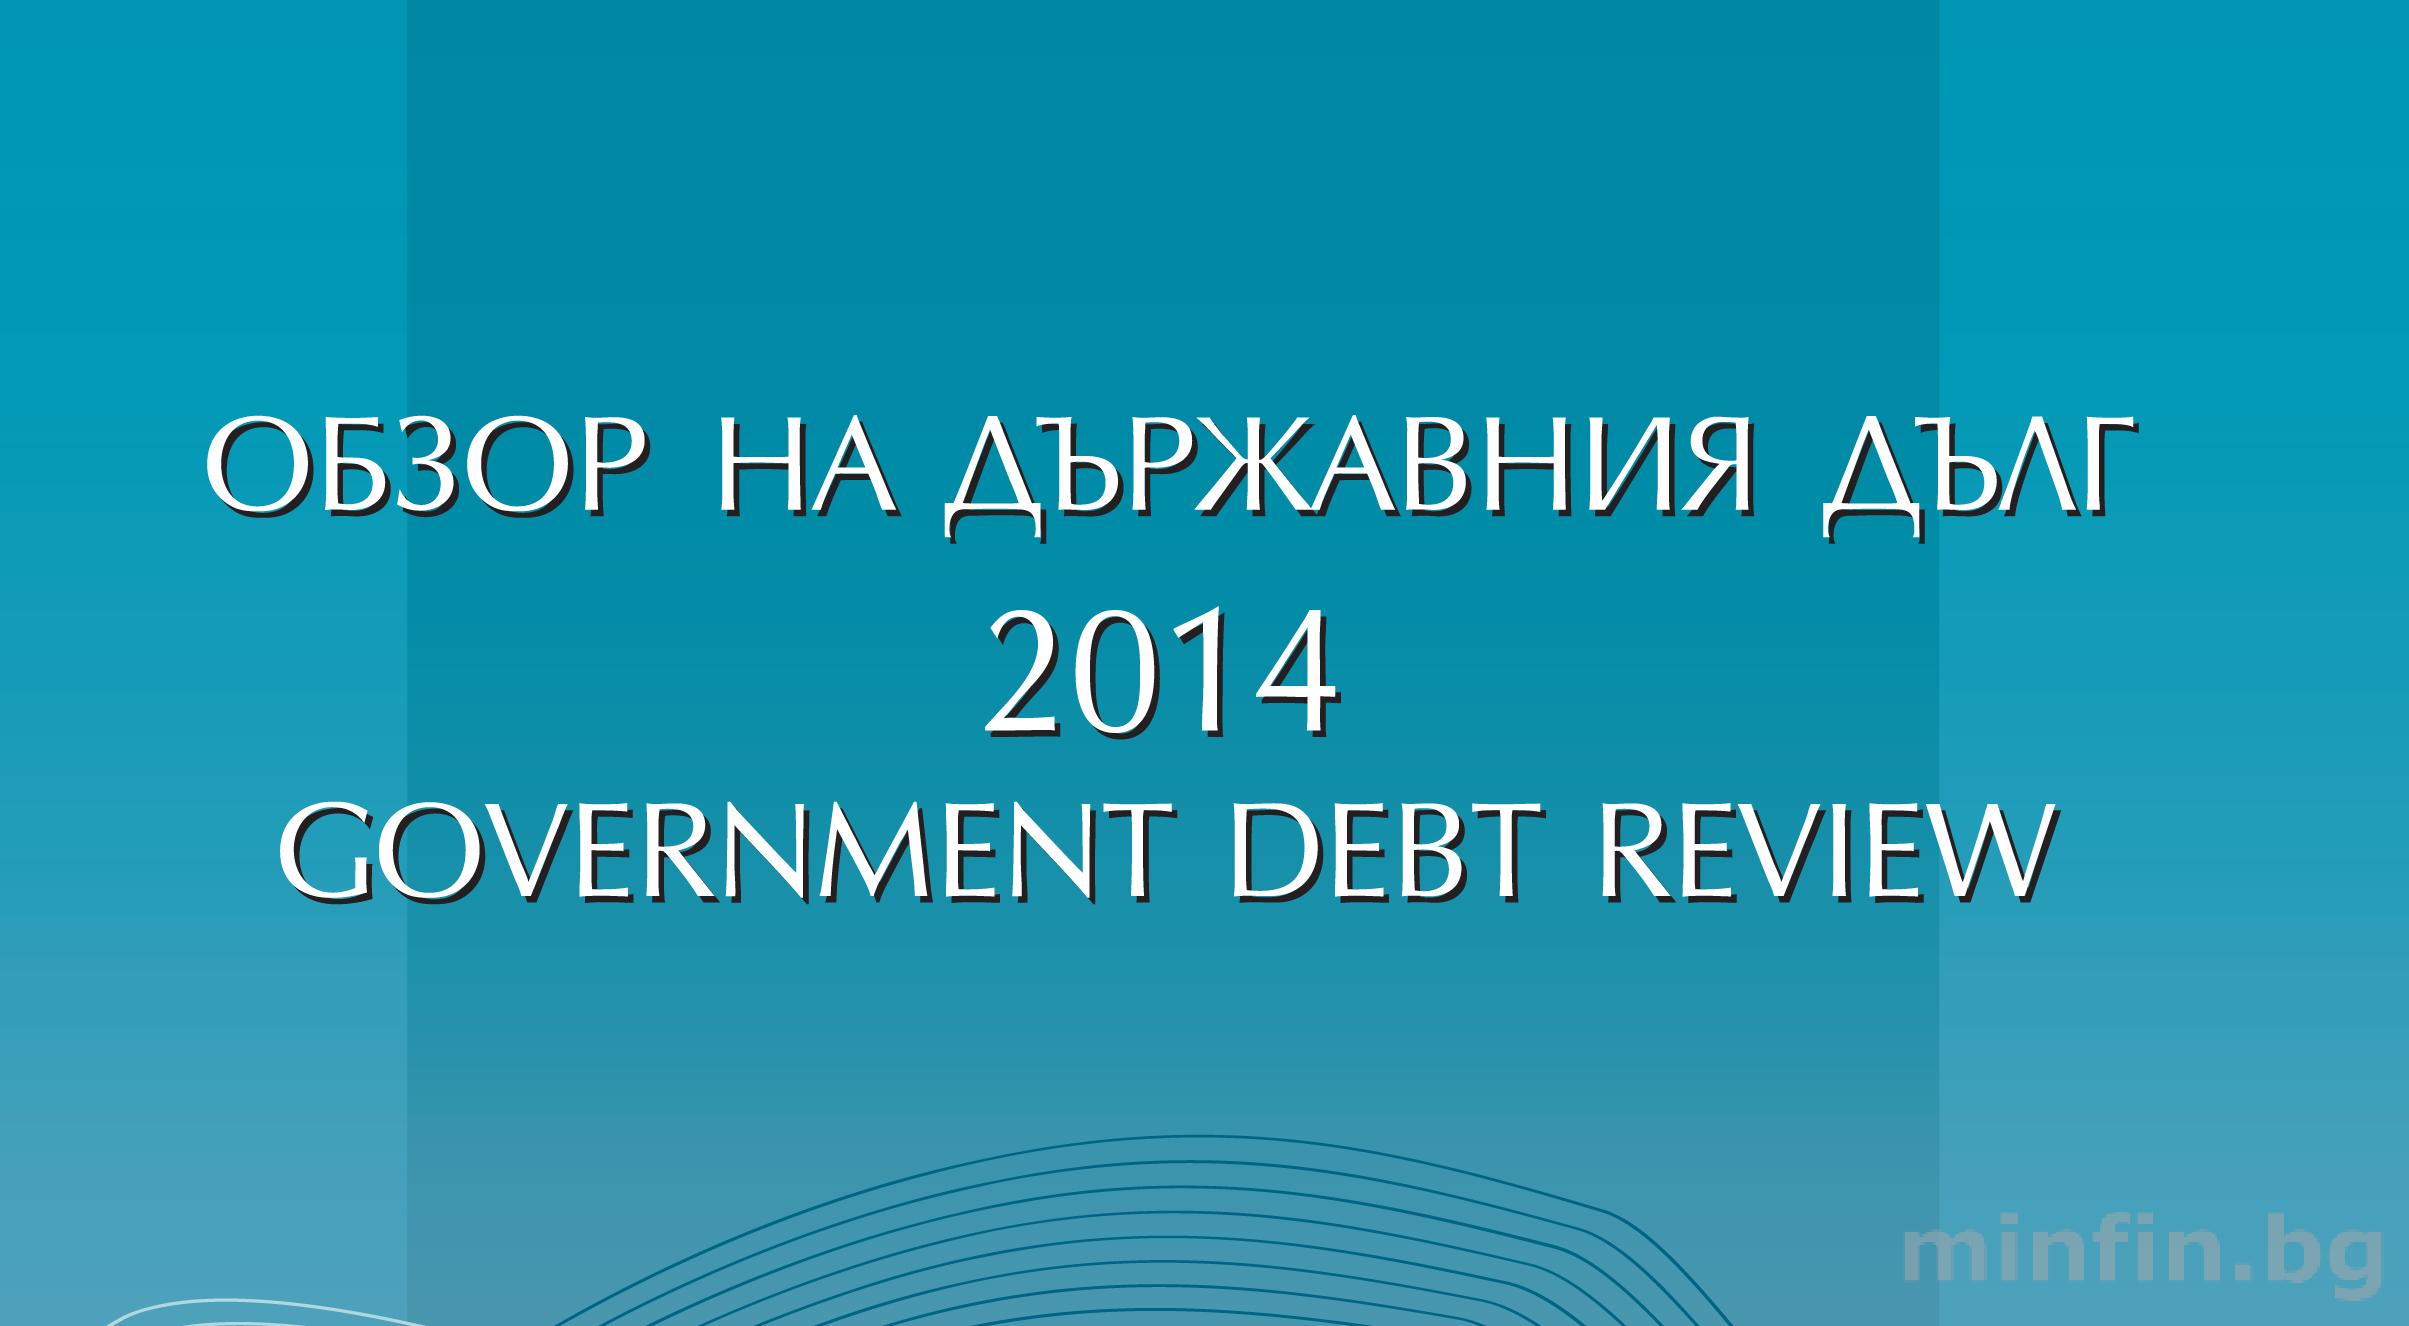 THE ANNUAL GOVERNMENT DEBT REVIEW FOR 2014 HAS BEEN PUBLISHED